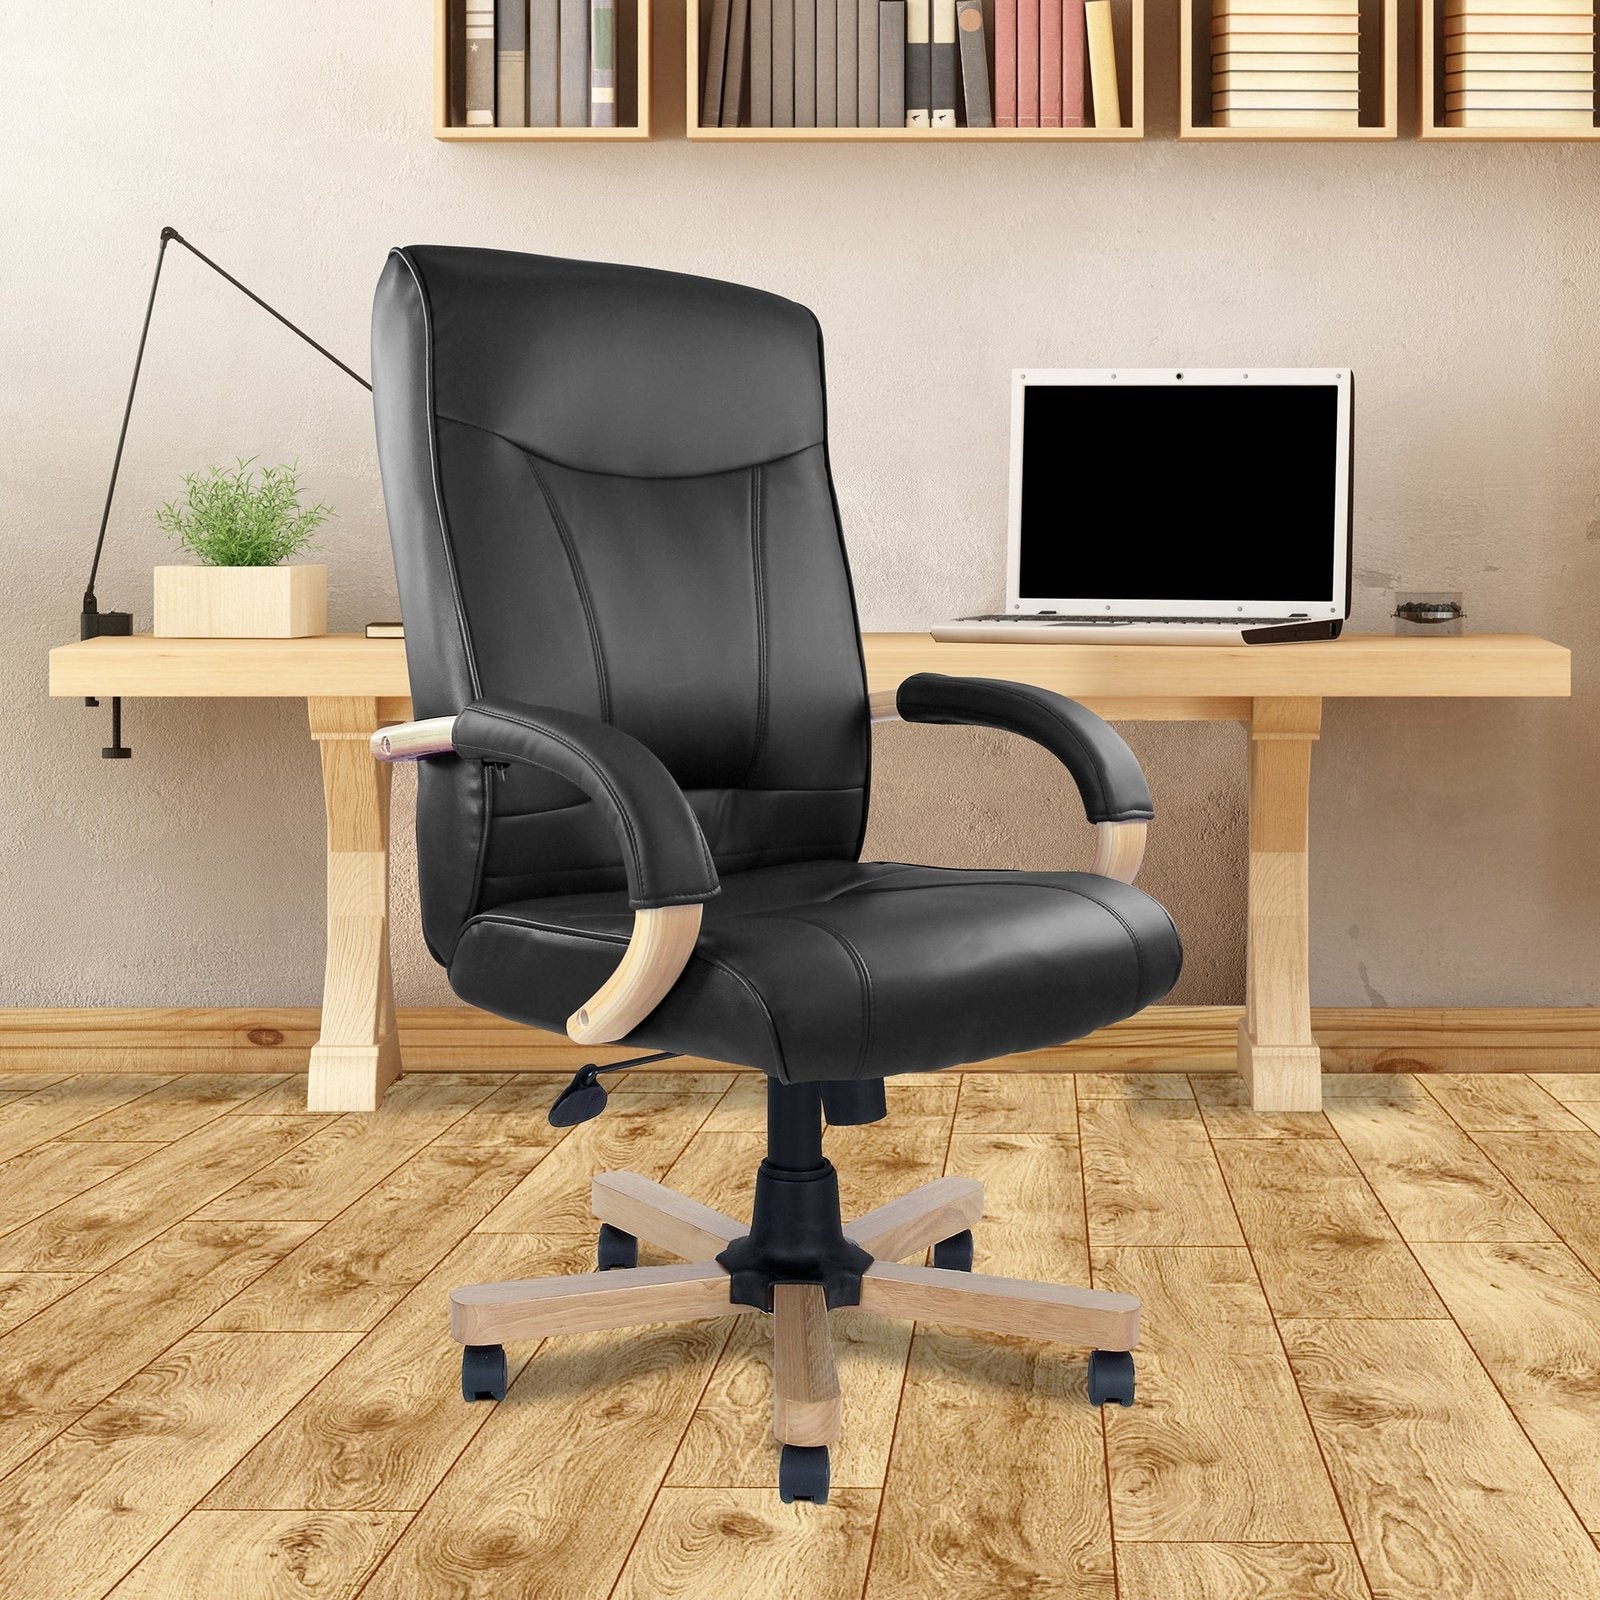 High Back Leather Faced Executive Chair with Oak Effect Arms & Base - Office Products Online